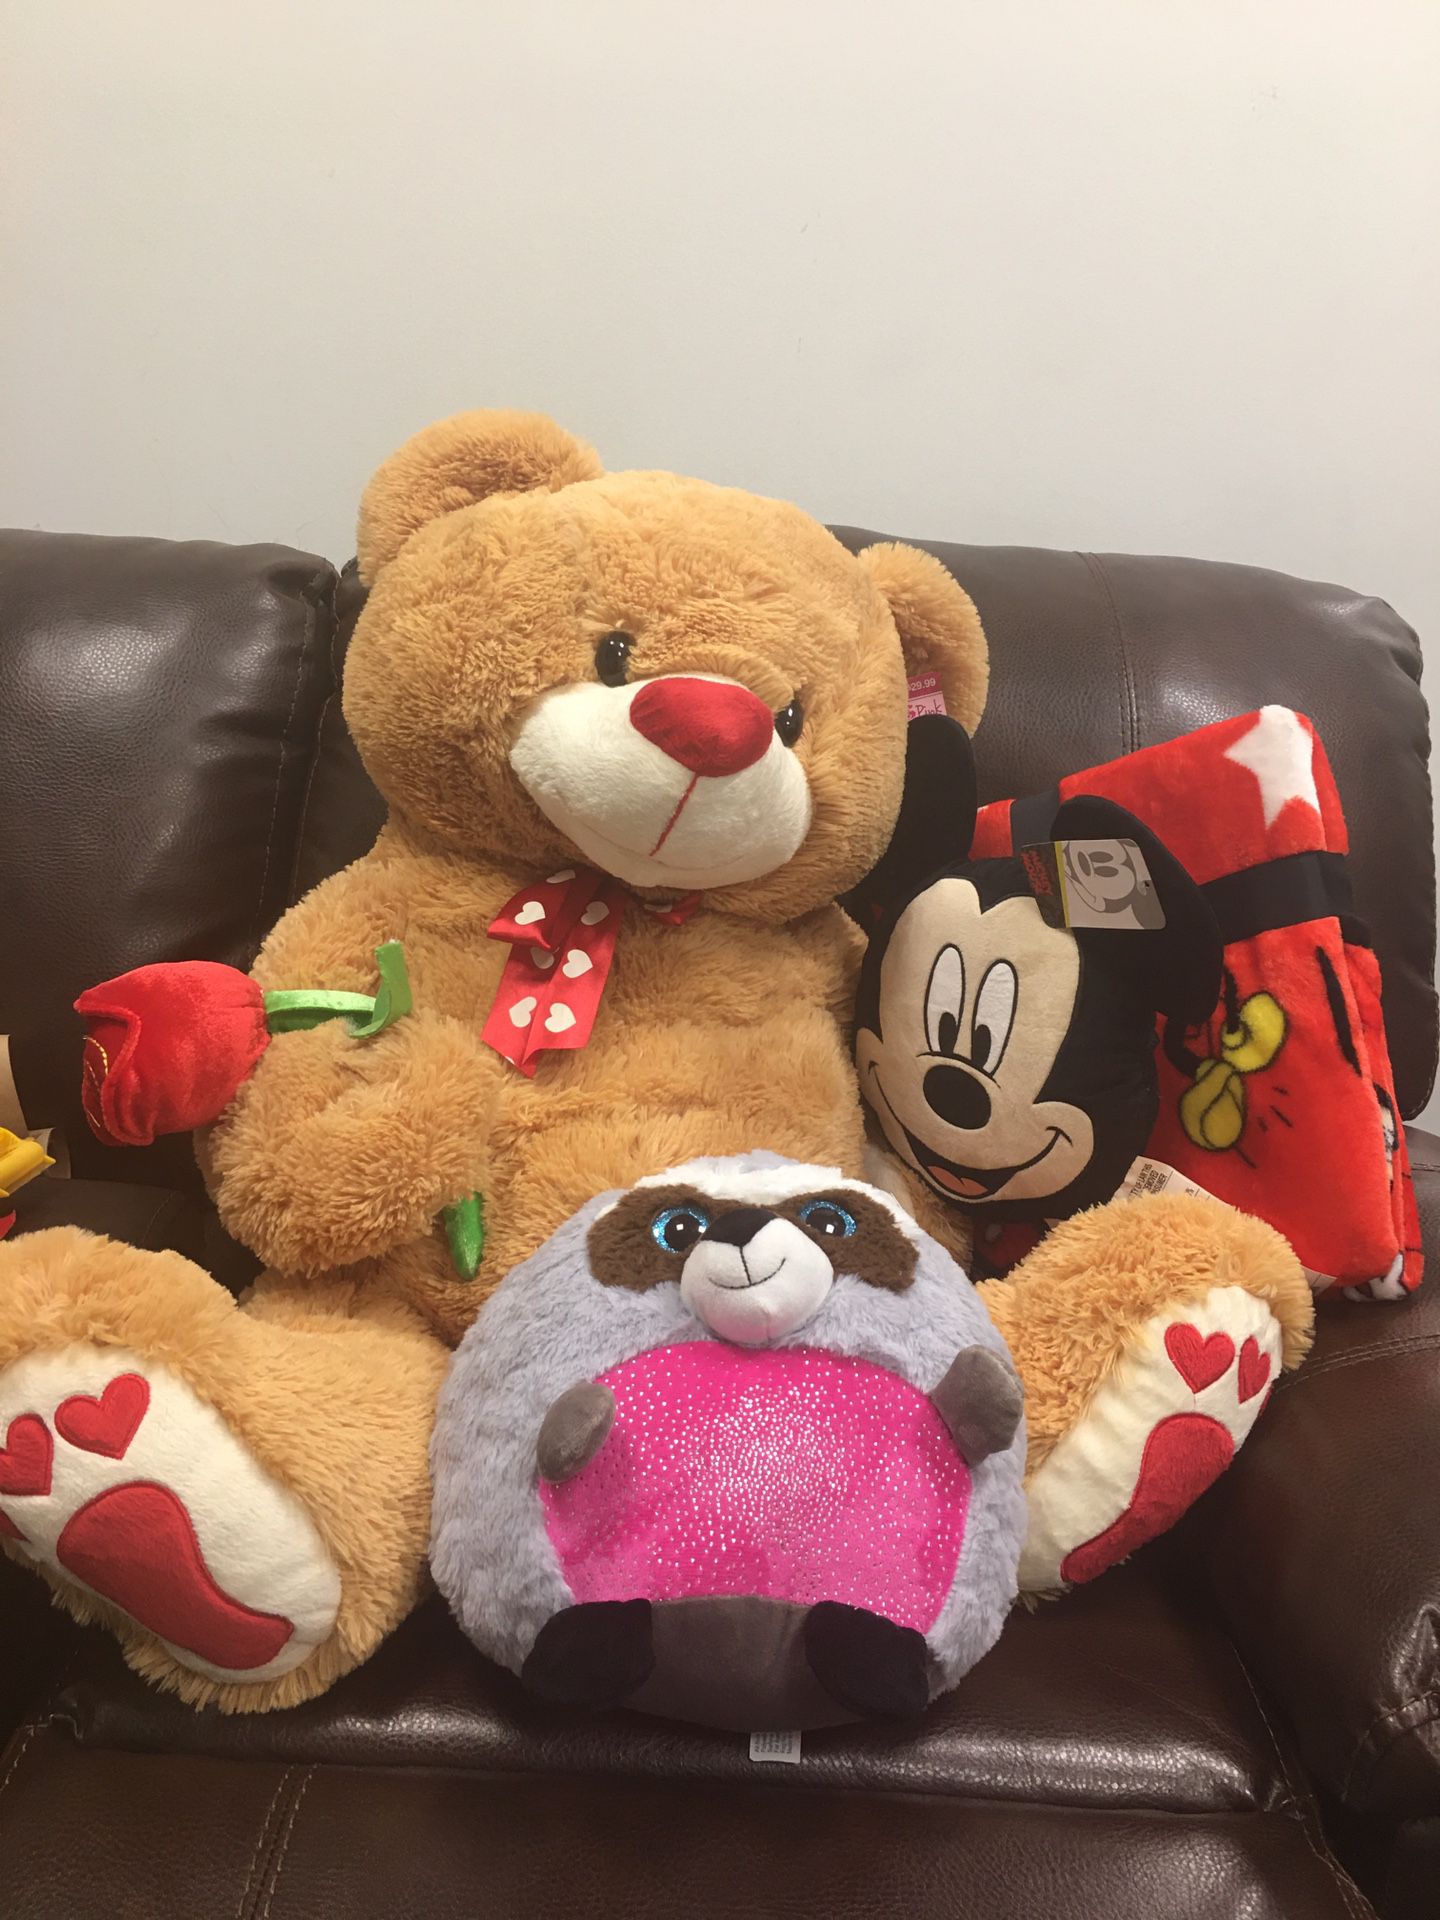 Brand new stuffed animals, life sized teddy bear and Mickey Mouse blanket all for $20